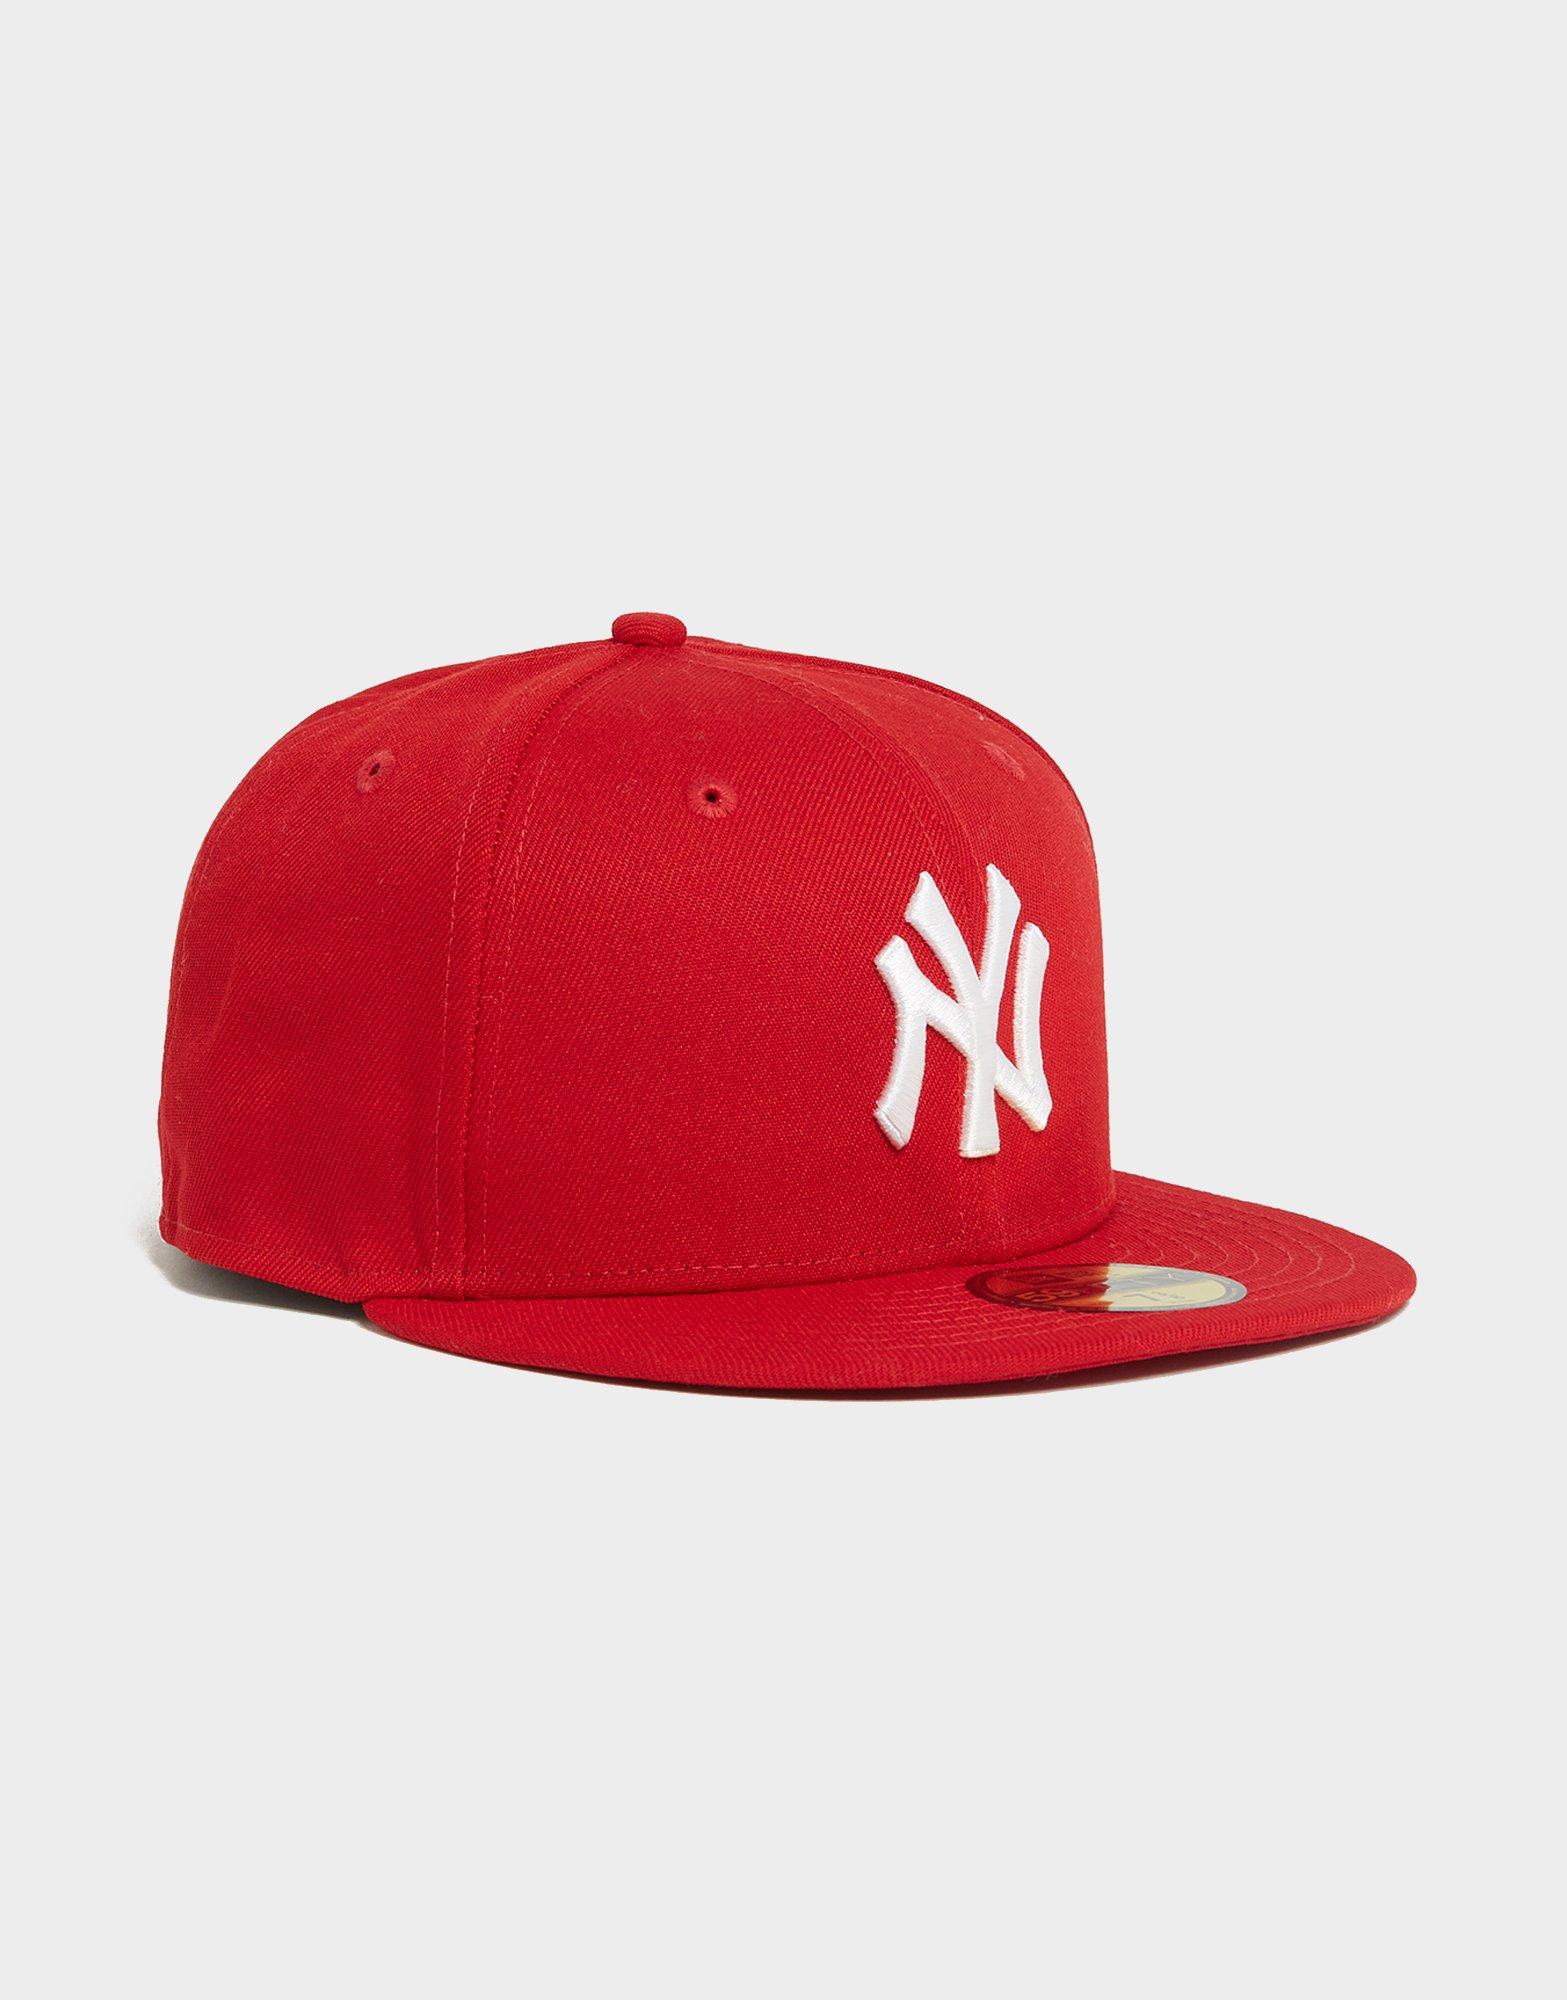  New Era Mens New York Yankees MLB Authentic Collection 59FIFTY  Cap, Size 6 3/4 : Sports & Outdoors